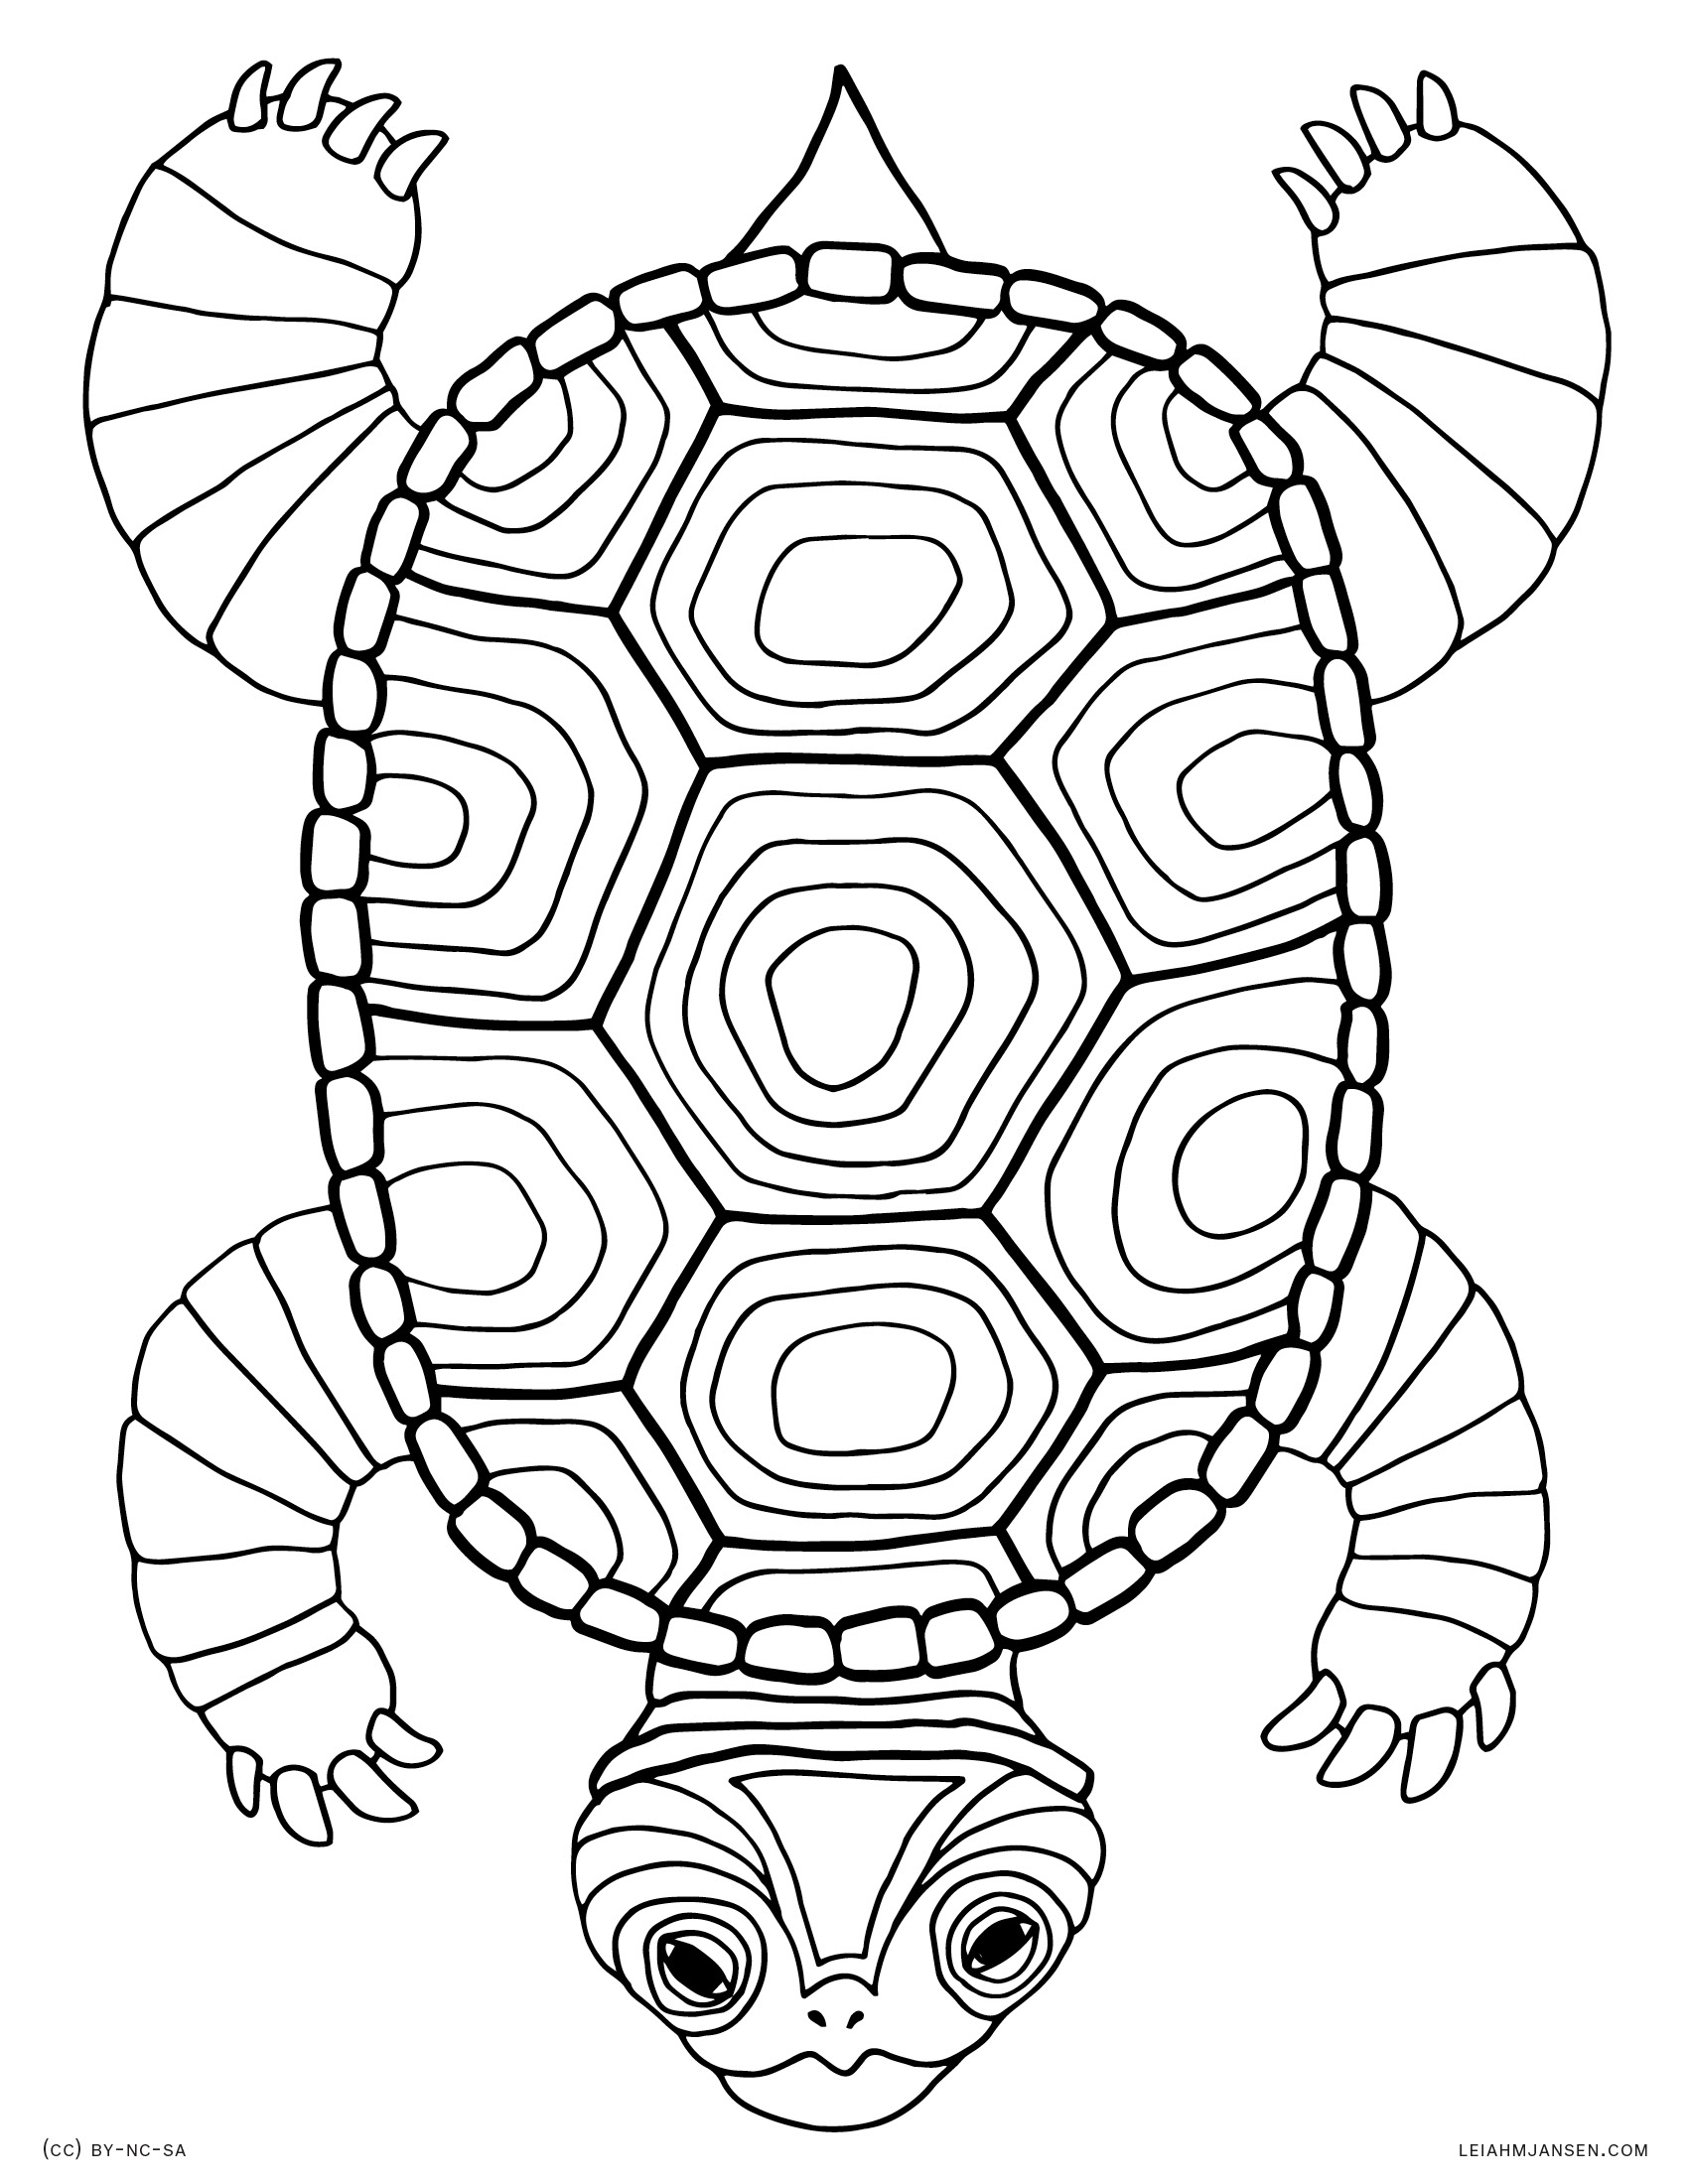 Coloring Pages Of Turtles 7